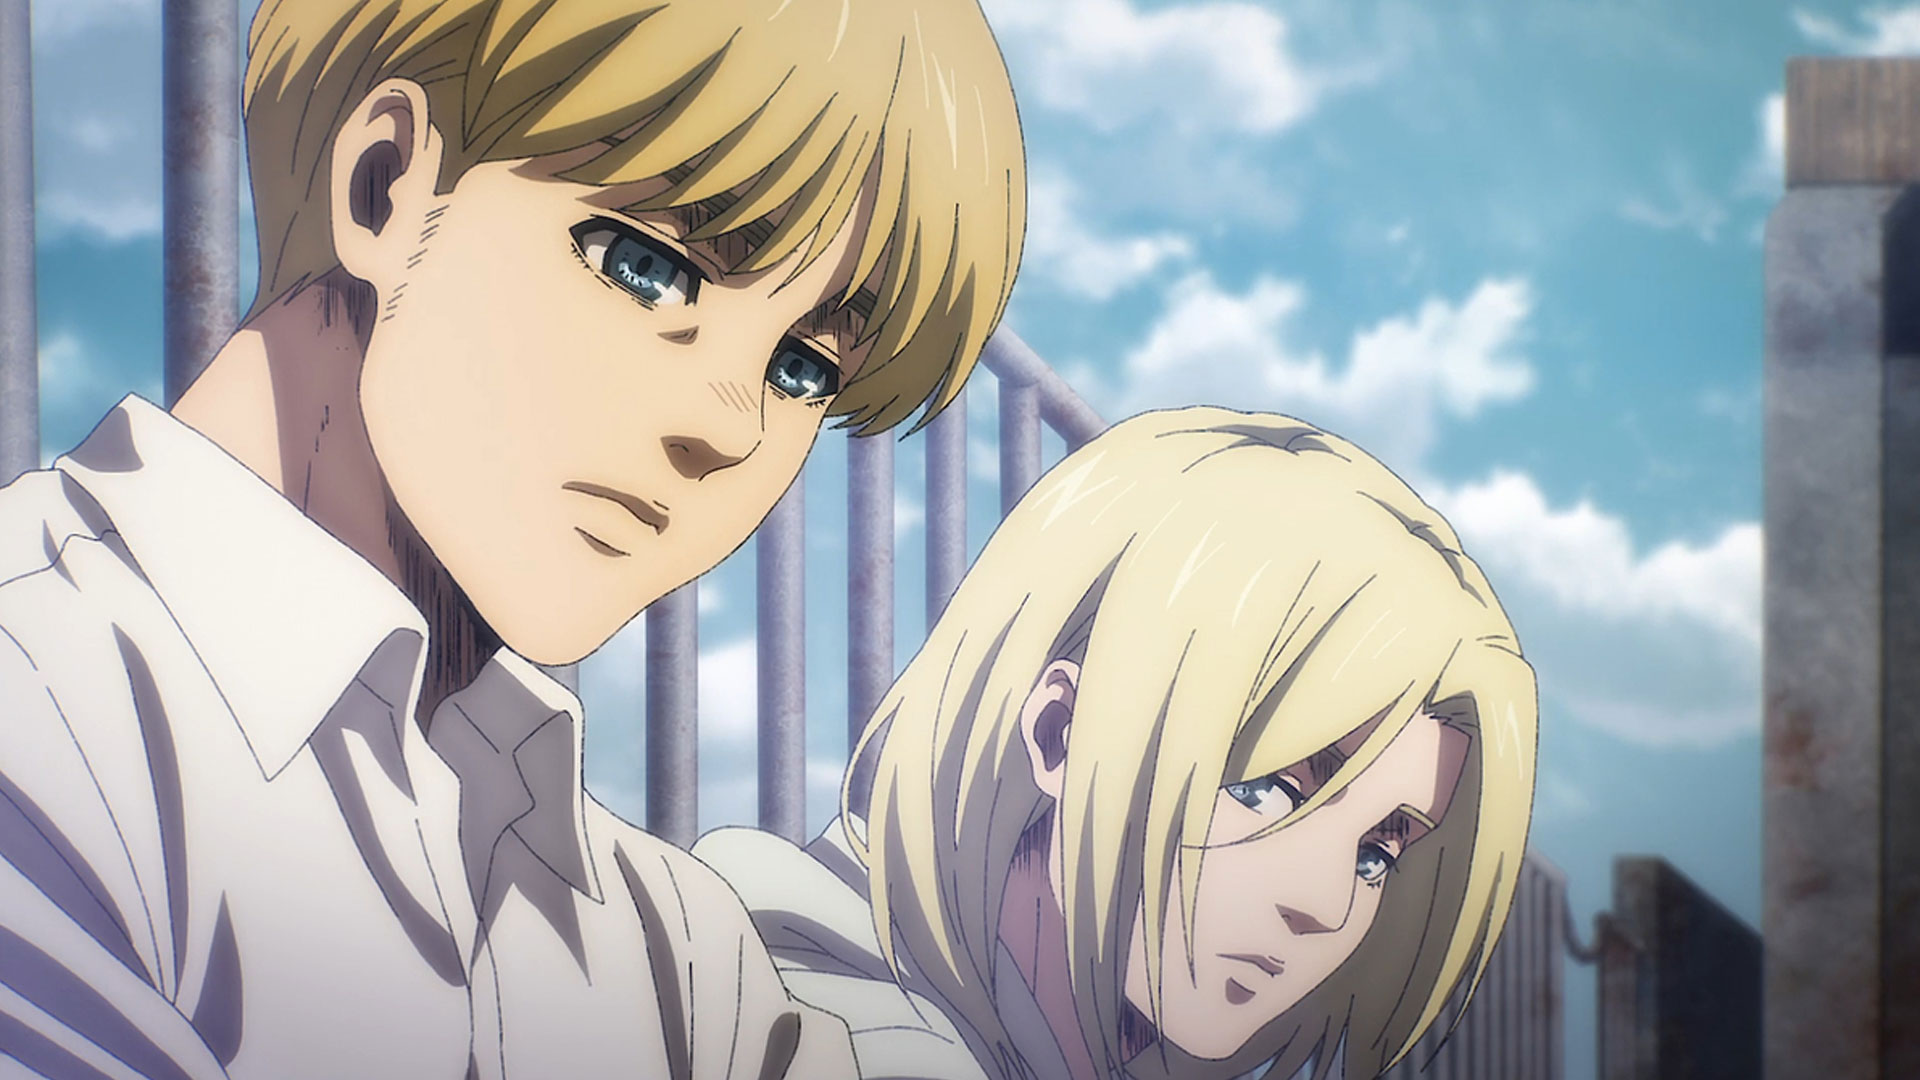 It’s Time to Admit It: Romance Ruined Attack on Titan